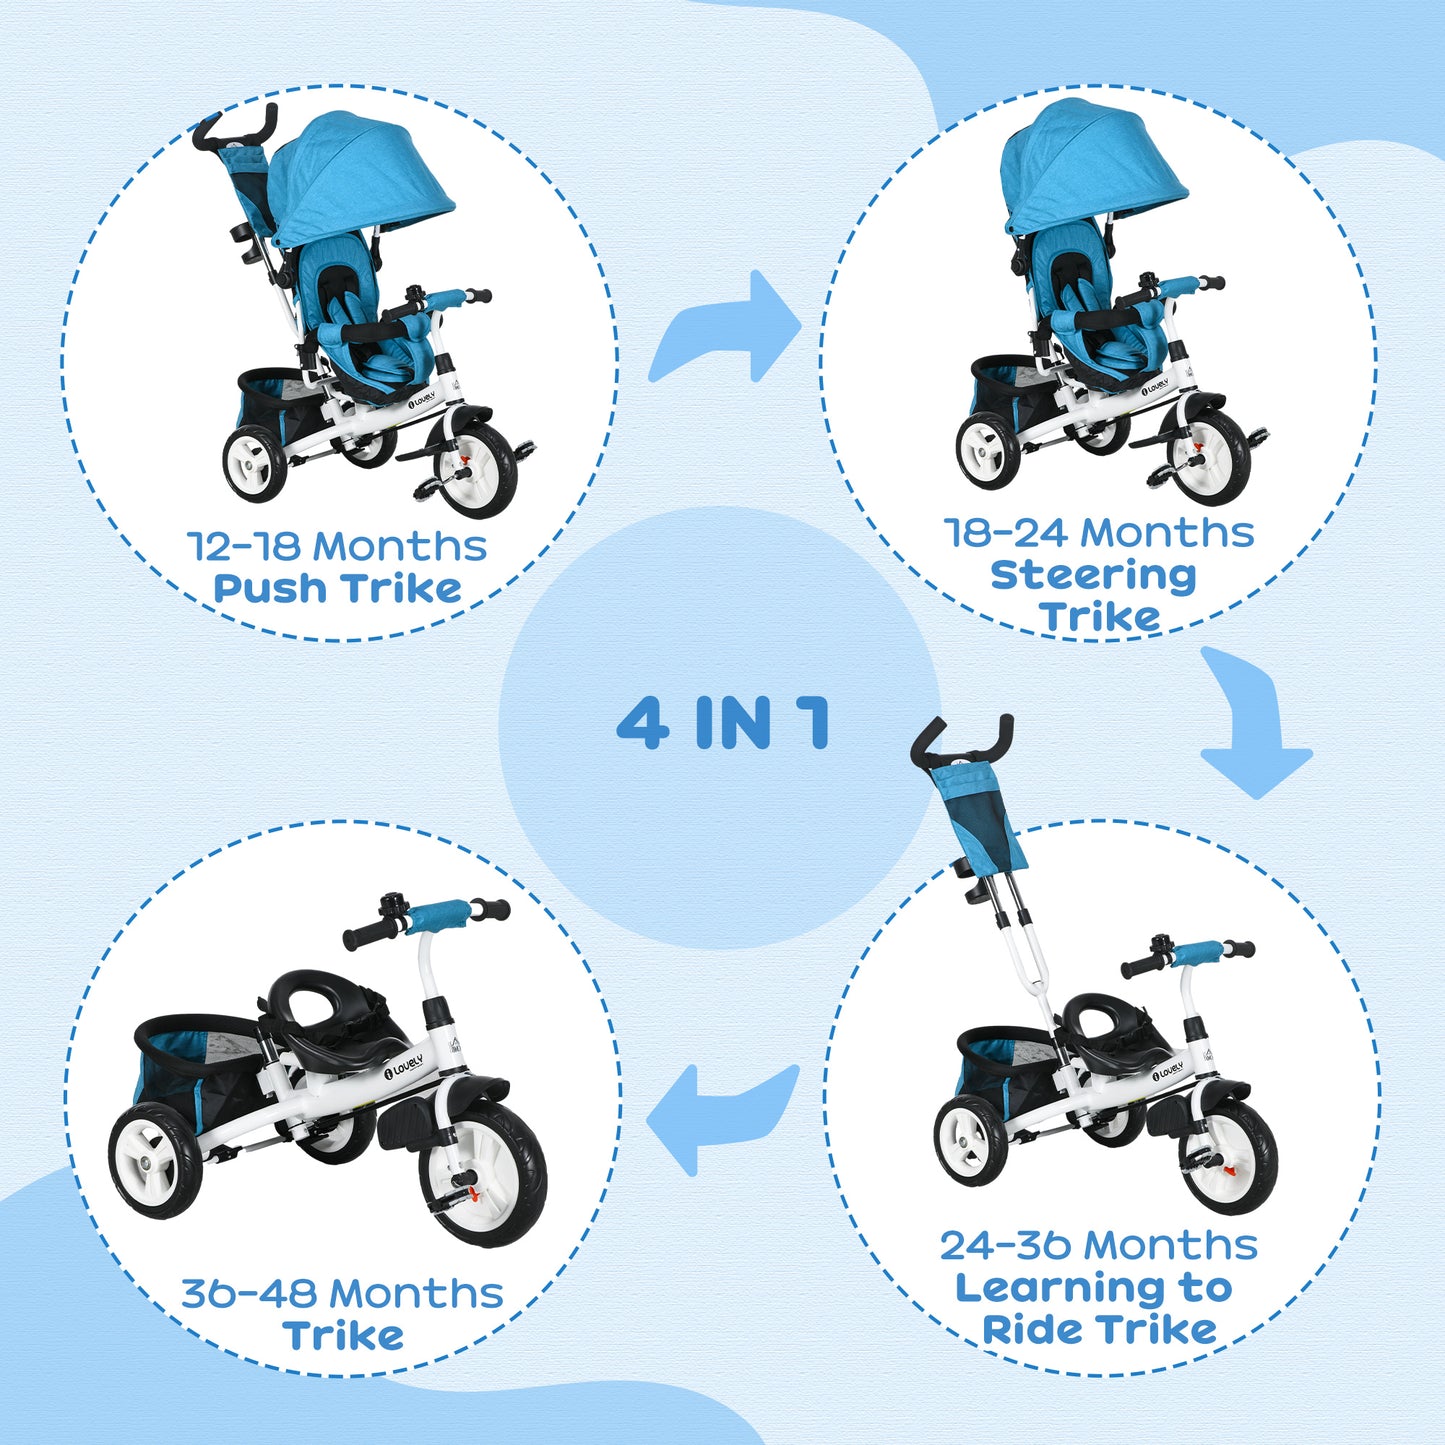 HOMCOM 4 in 1 Kids Trike Push Bike w/ Push Handle 5-point Safety Belt for 1-5 Year olds Blue